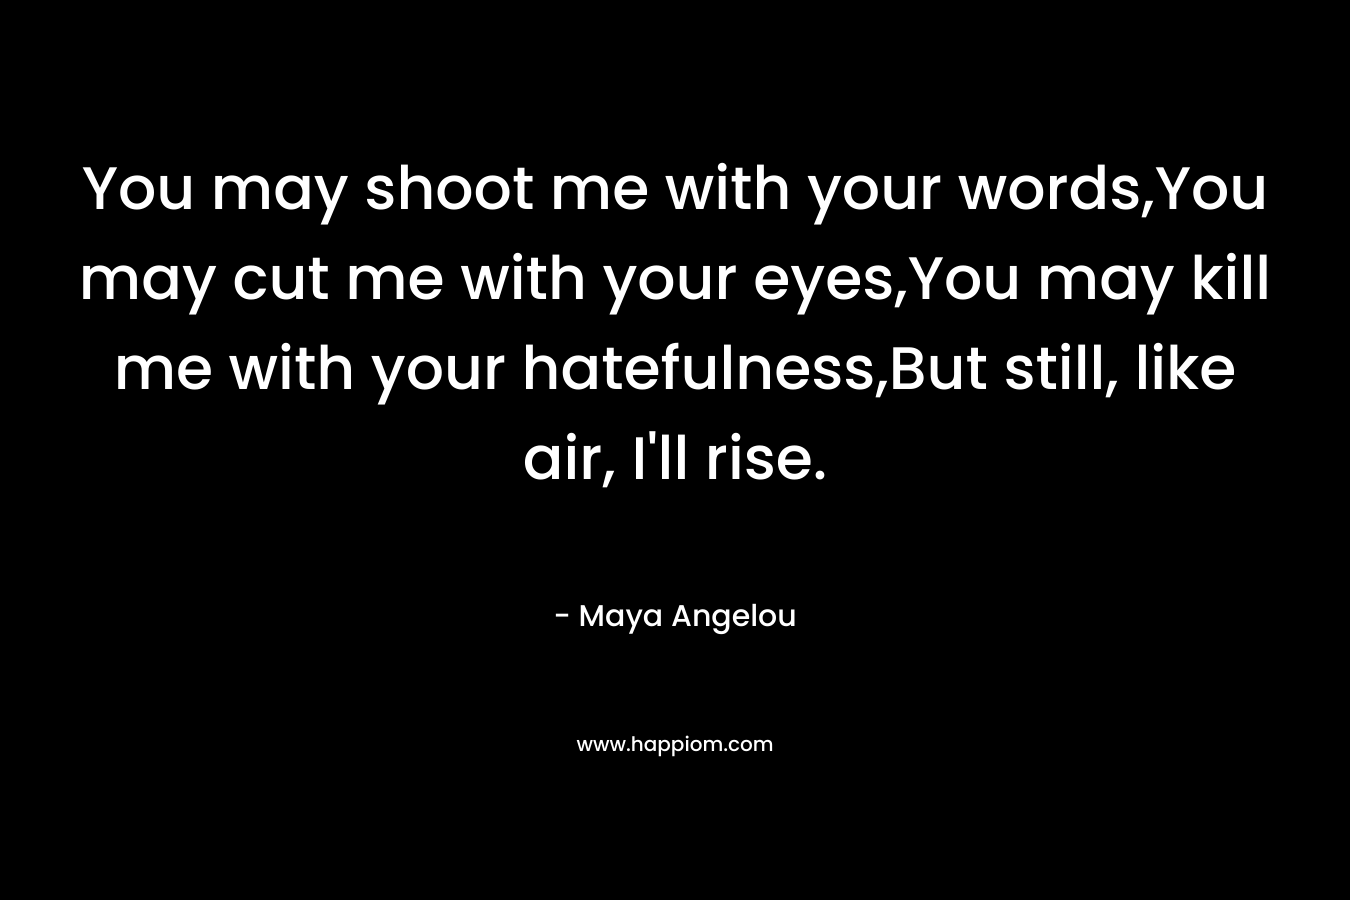 You may shoot me with your words,You may cut me with your eyes,You may kill me with your hatefulness,But still, like air, I’ll rise. – Maya Angelou